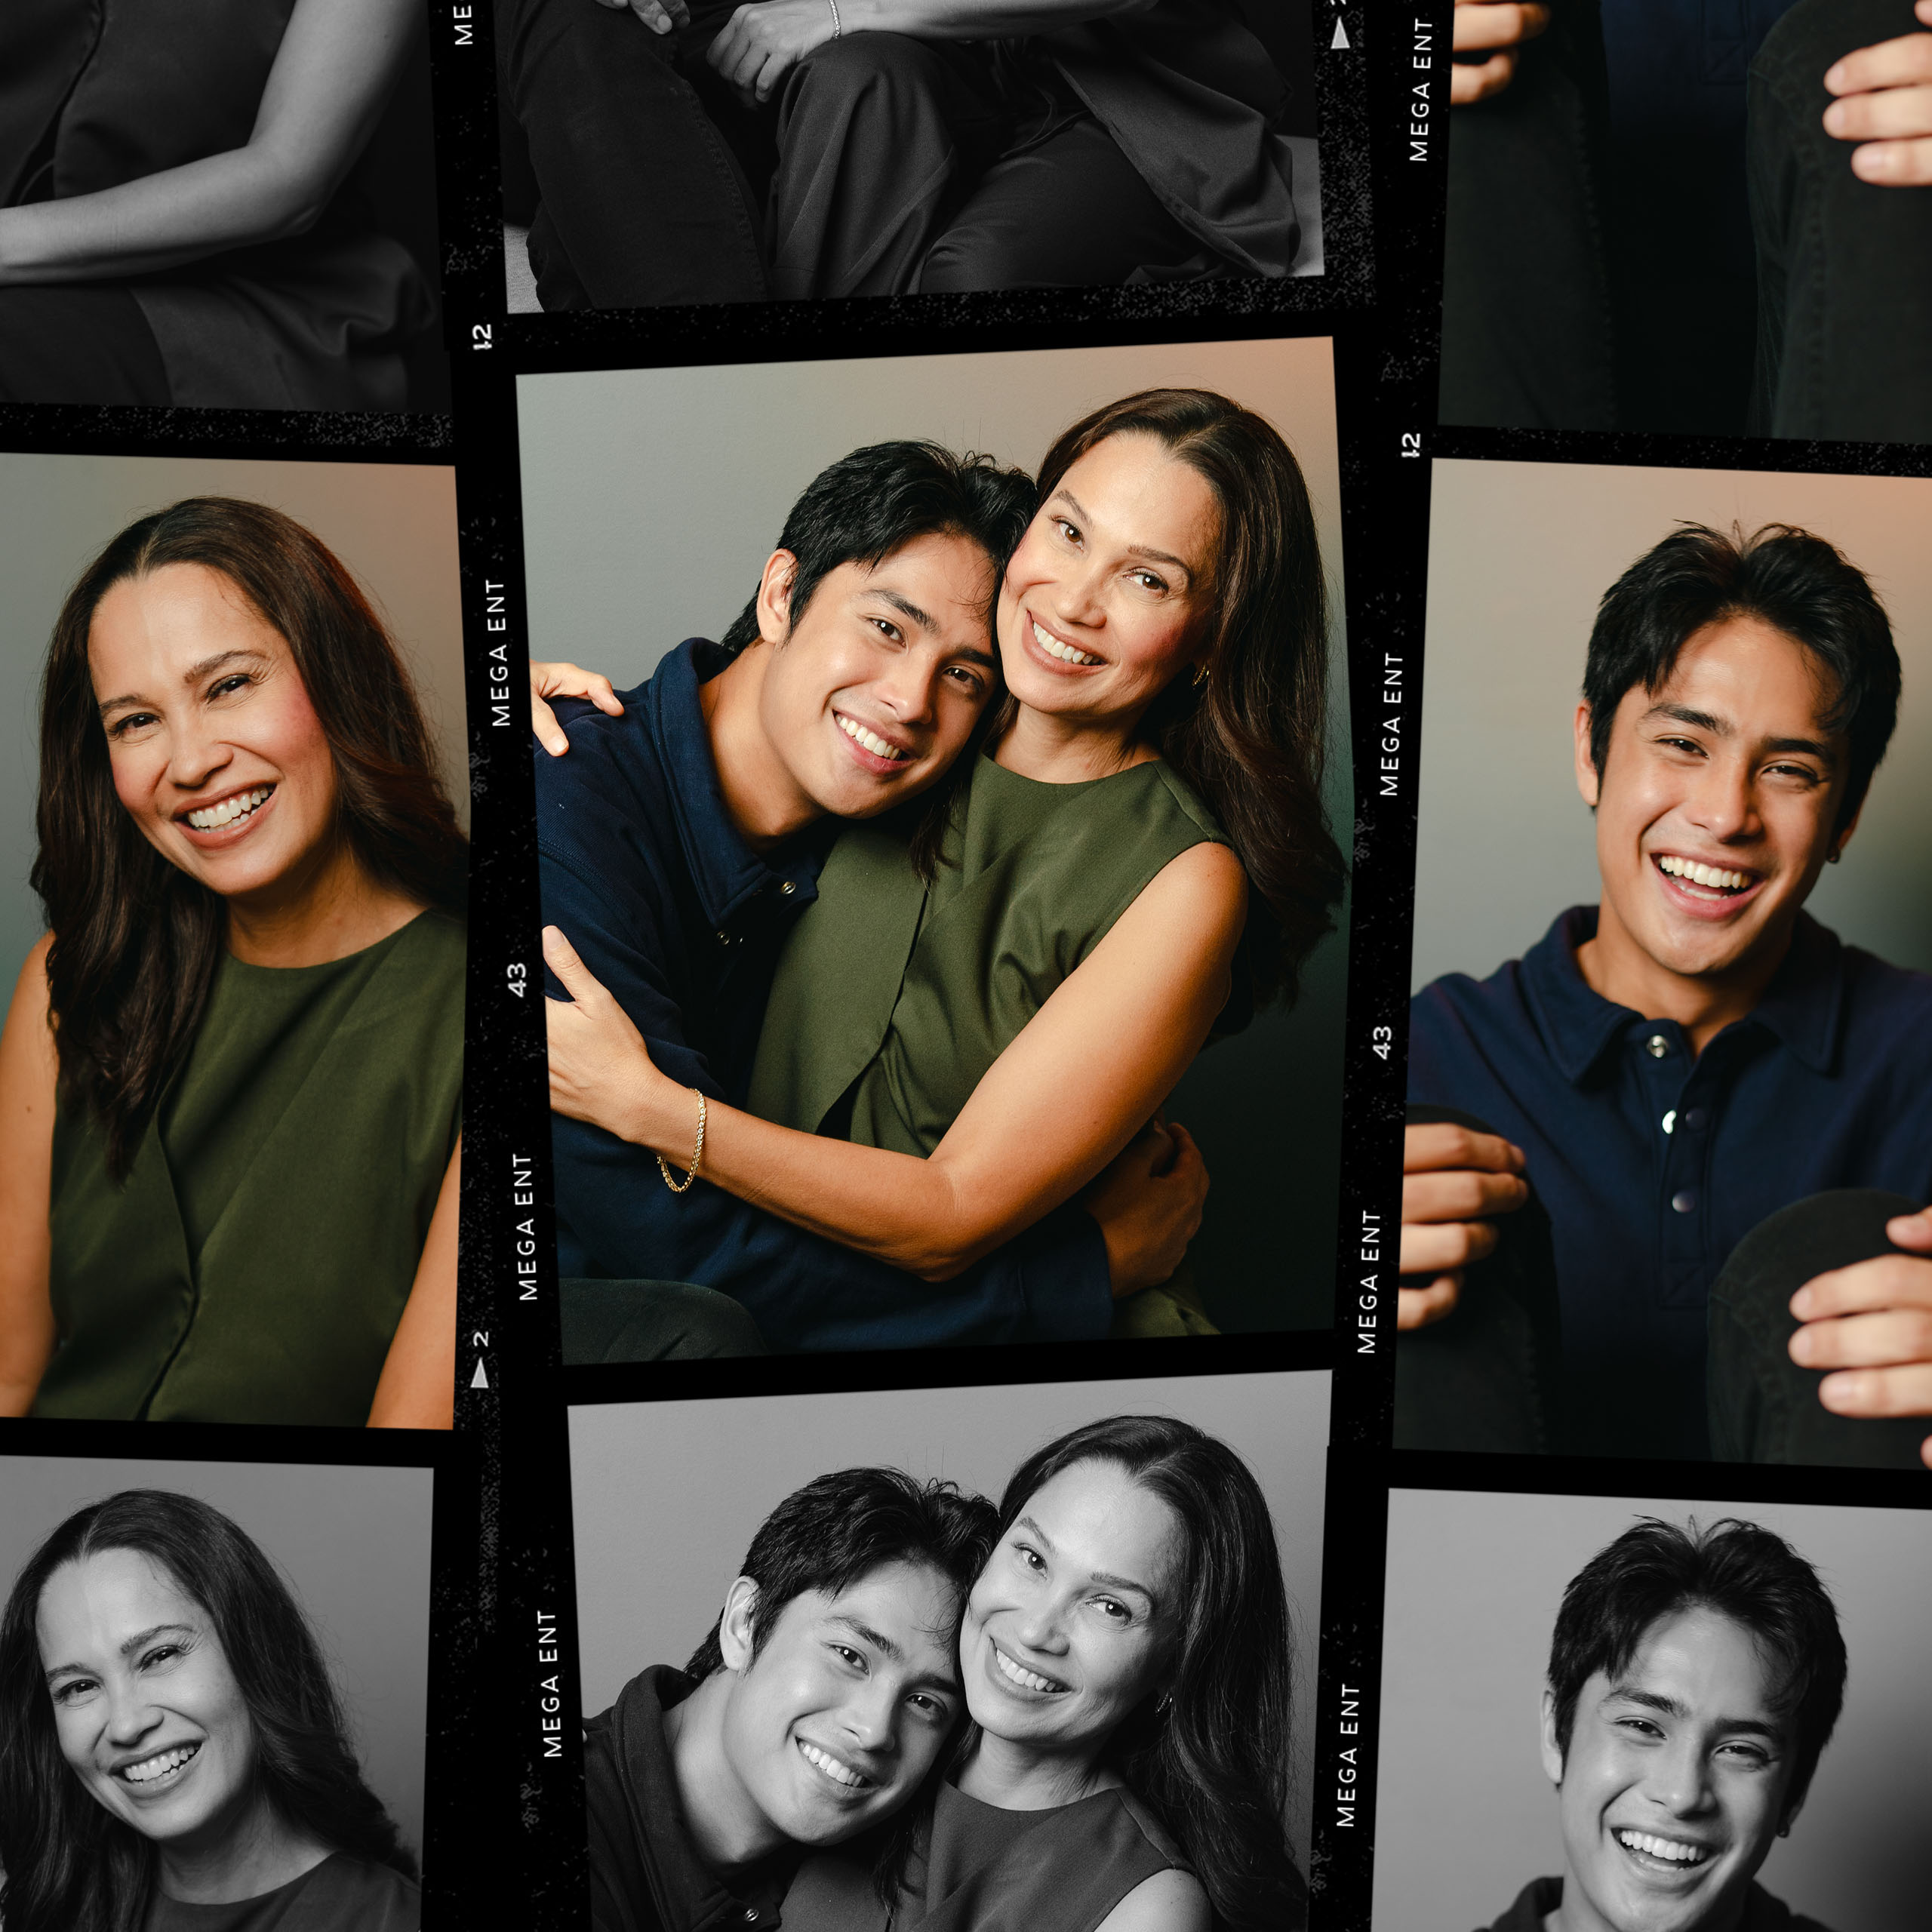 EXCLUSIVE: Donny Pangilinan and Maricel Laxa on Acting Together For the First Time and Future Family Projects